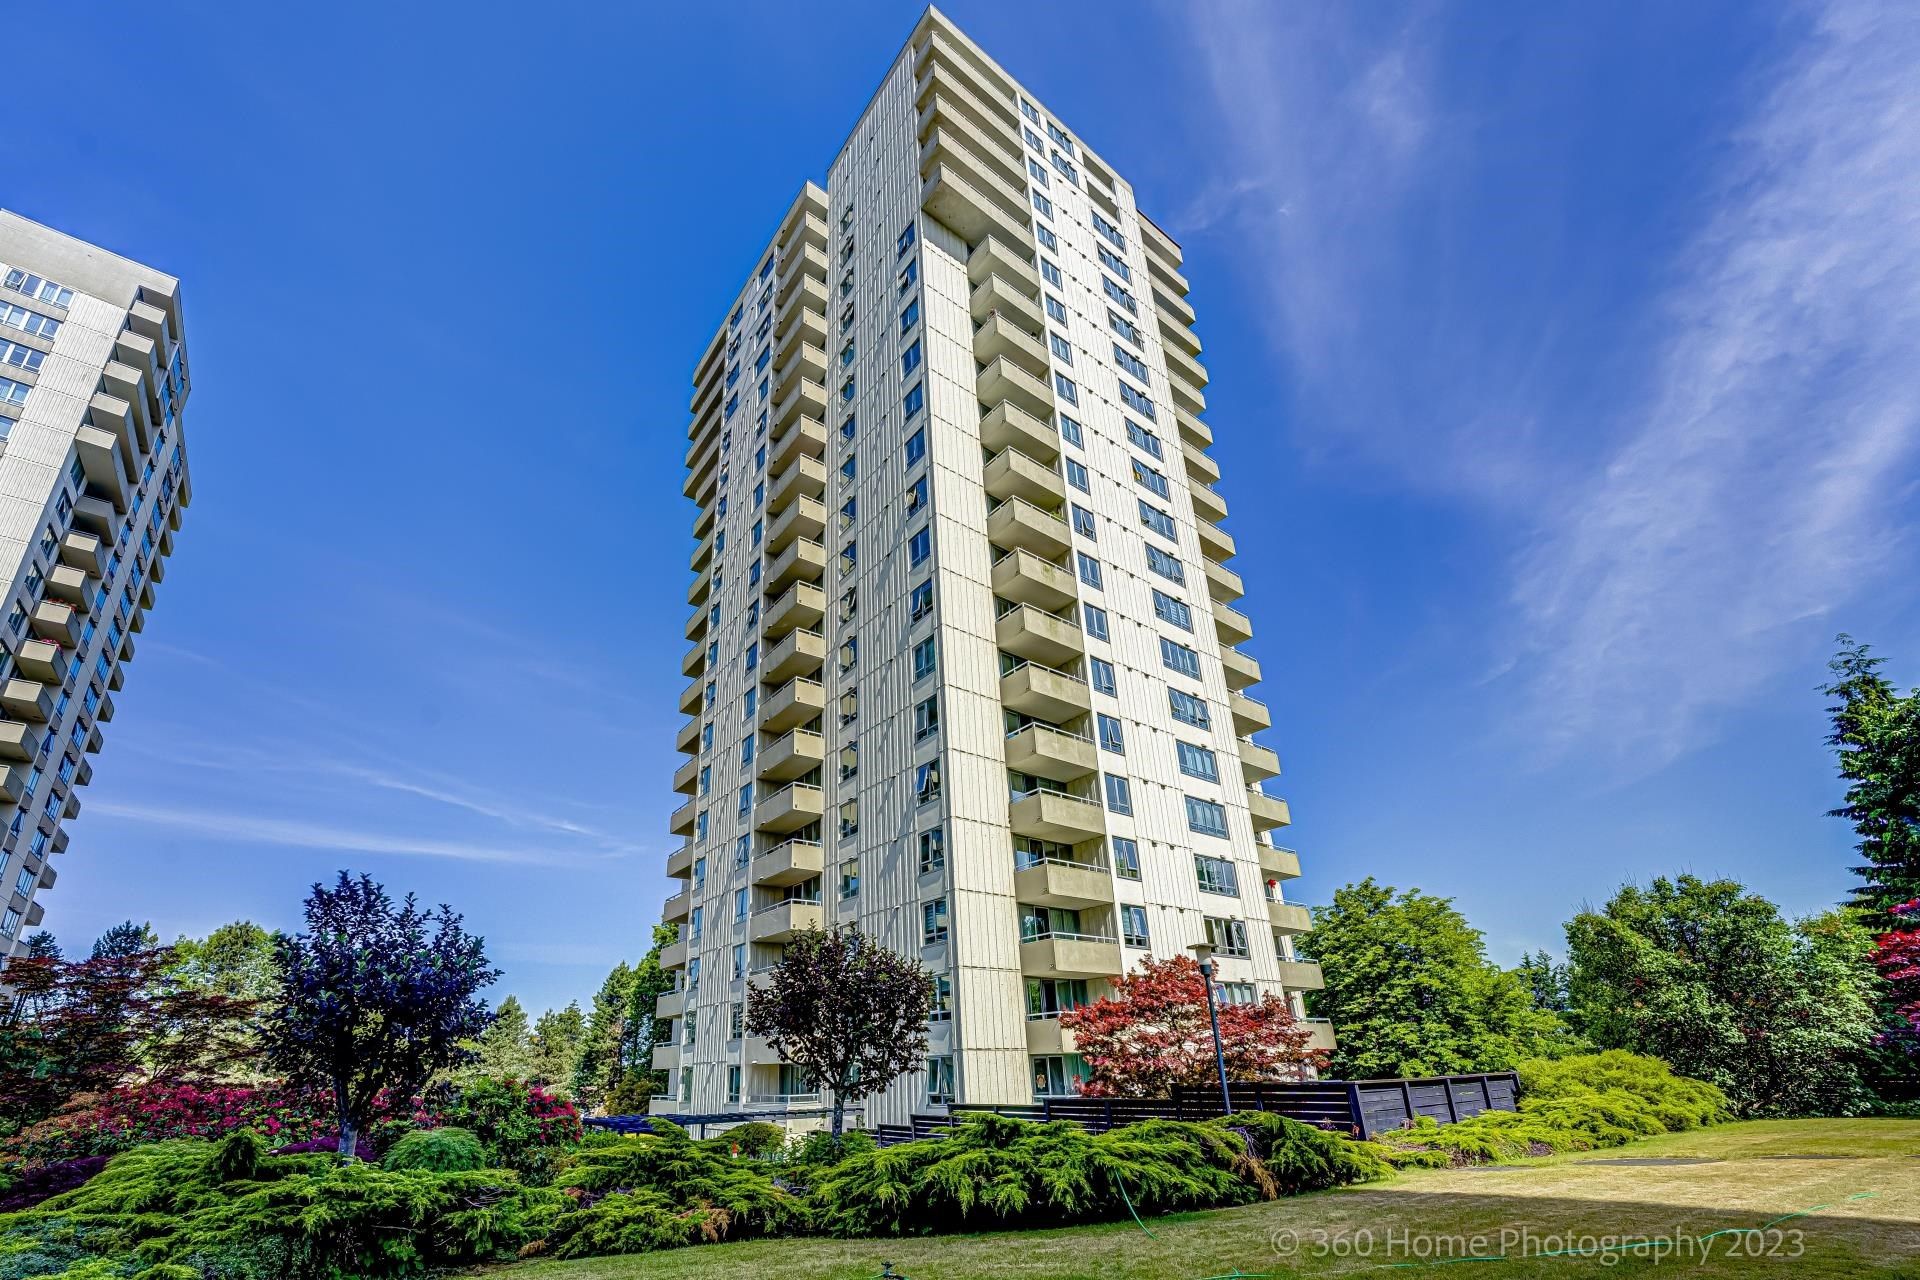 I have sold a property at 601 4160 SARDIS ST in Burnaby
